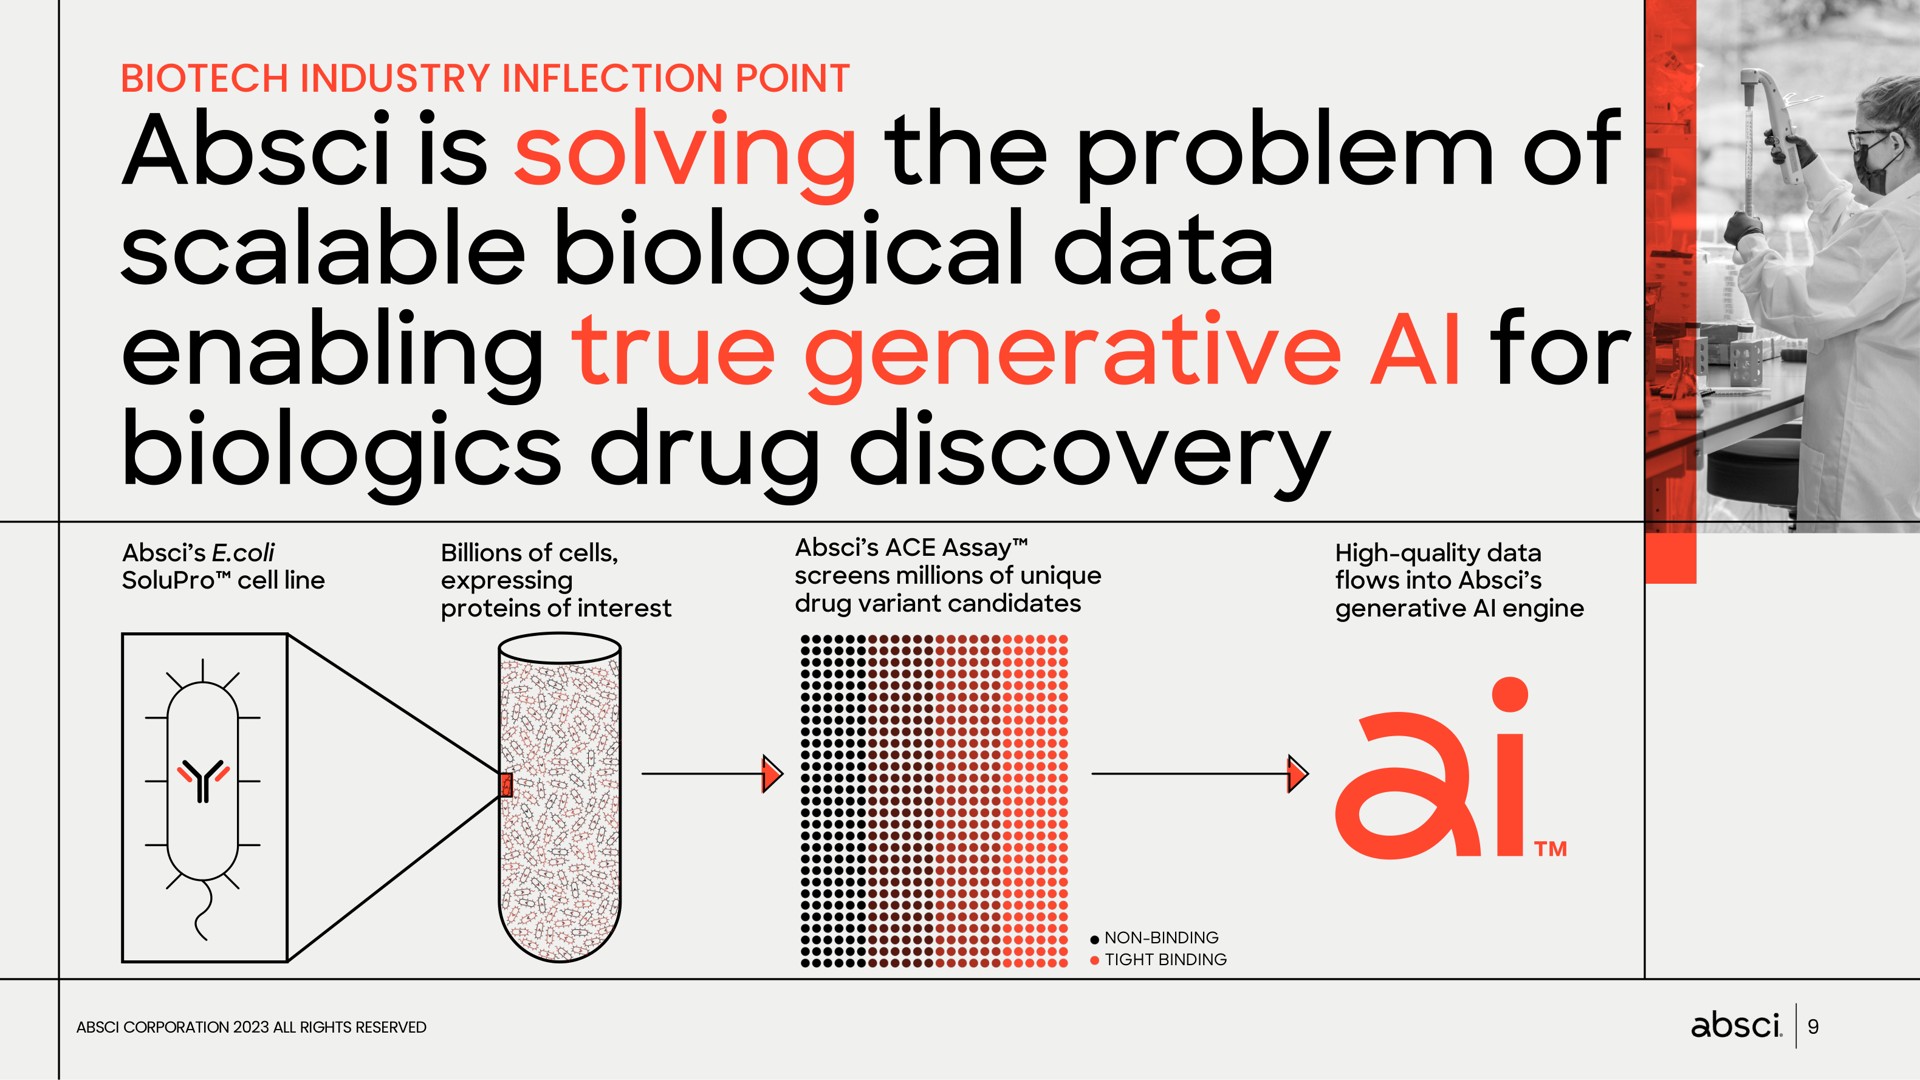 is solving the problem of scalable biological data enabling true generative for drug discovery | Absci